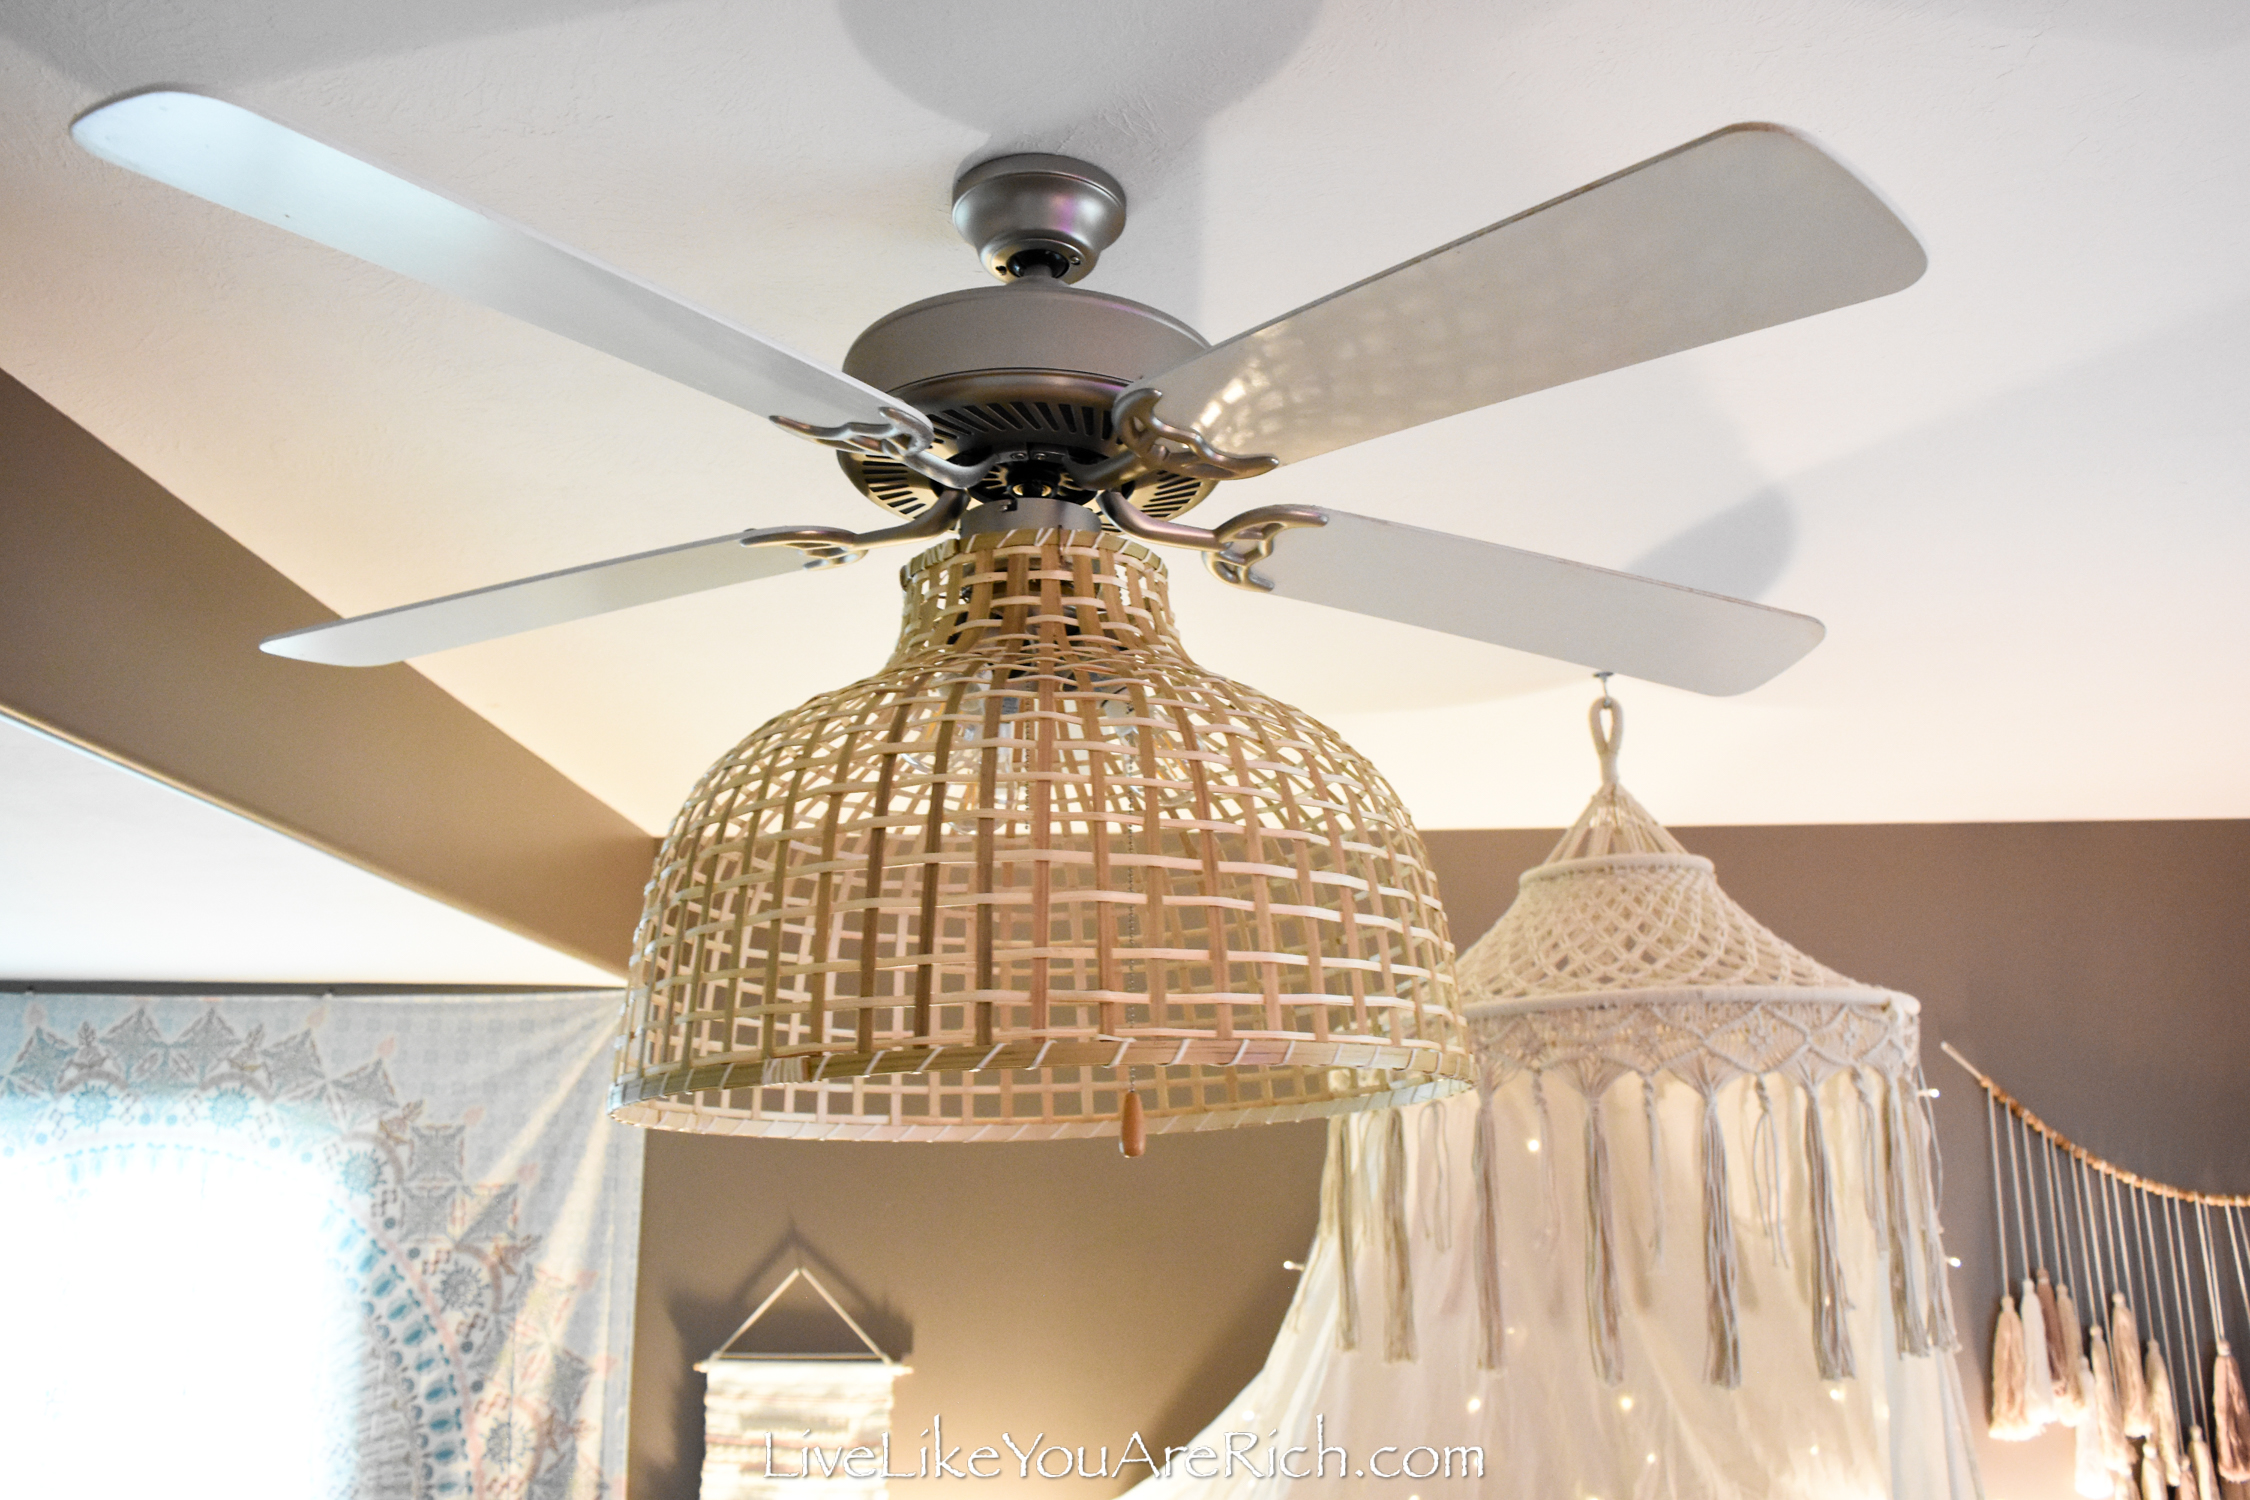 Step-by-Step Guide to Changing Ceiling Fan Lights插图2